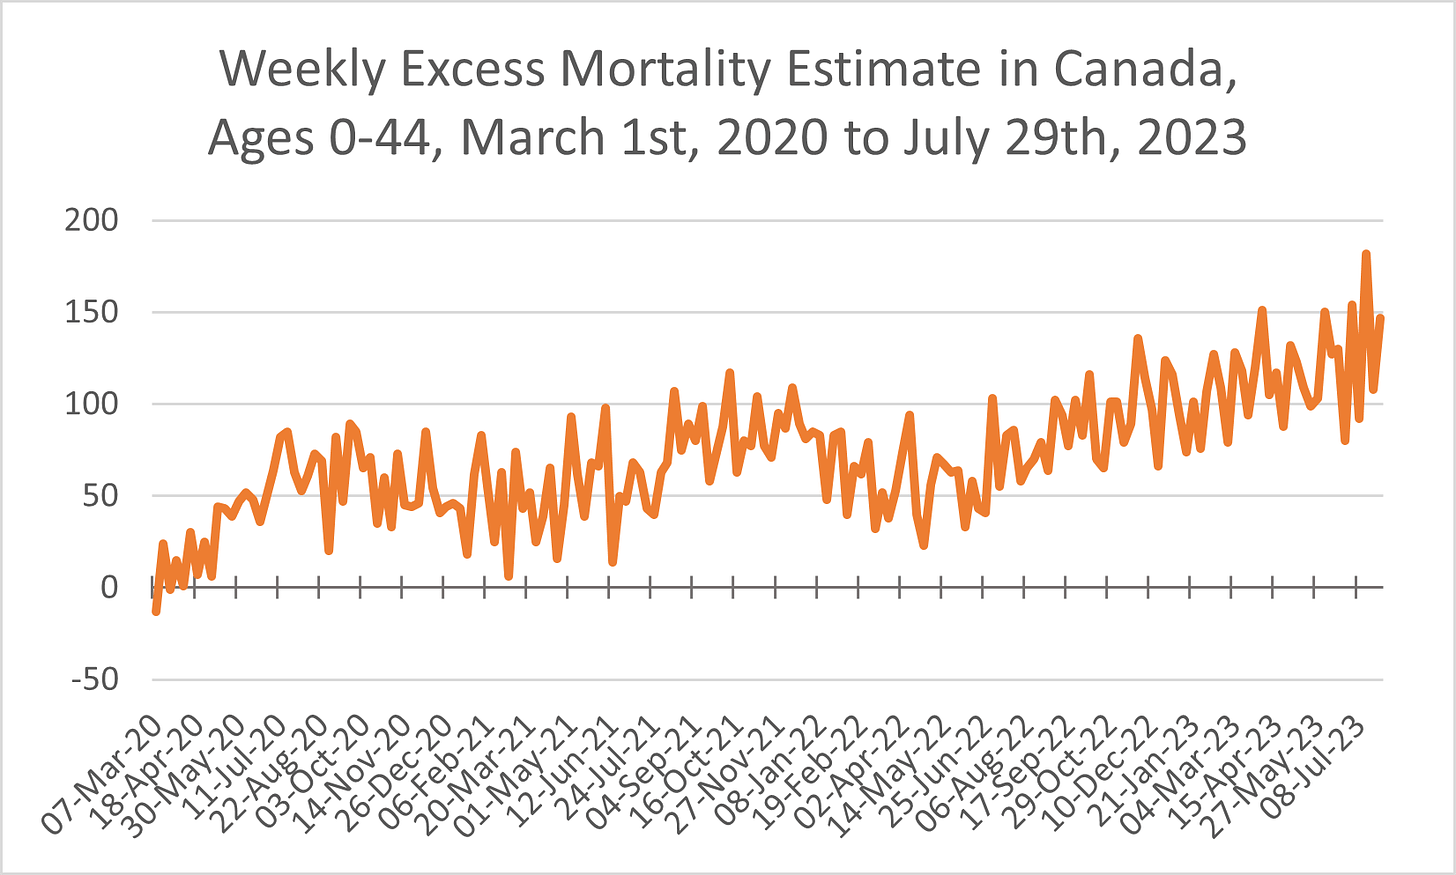 Line chart showing weekly excess mortality in Canada among those aged 0-44 from March 1st, 2020 to July 29th, 2023. The figure is above 0 from April 2020 onwards, growing increasingly high over time, hitting a high around 180 in July 2023.